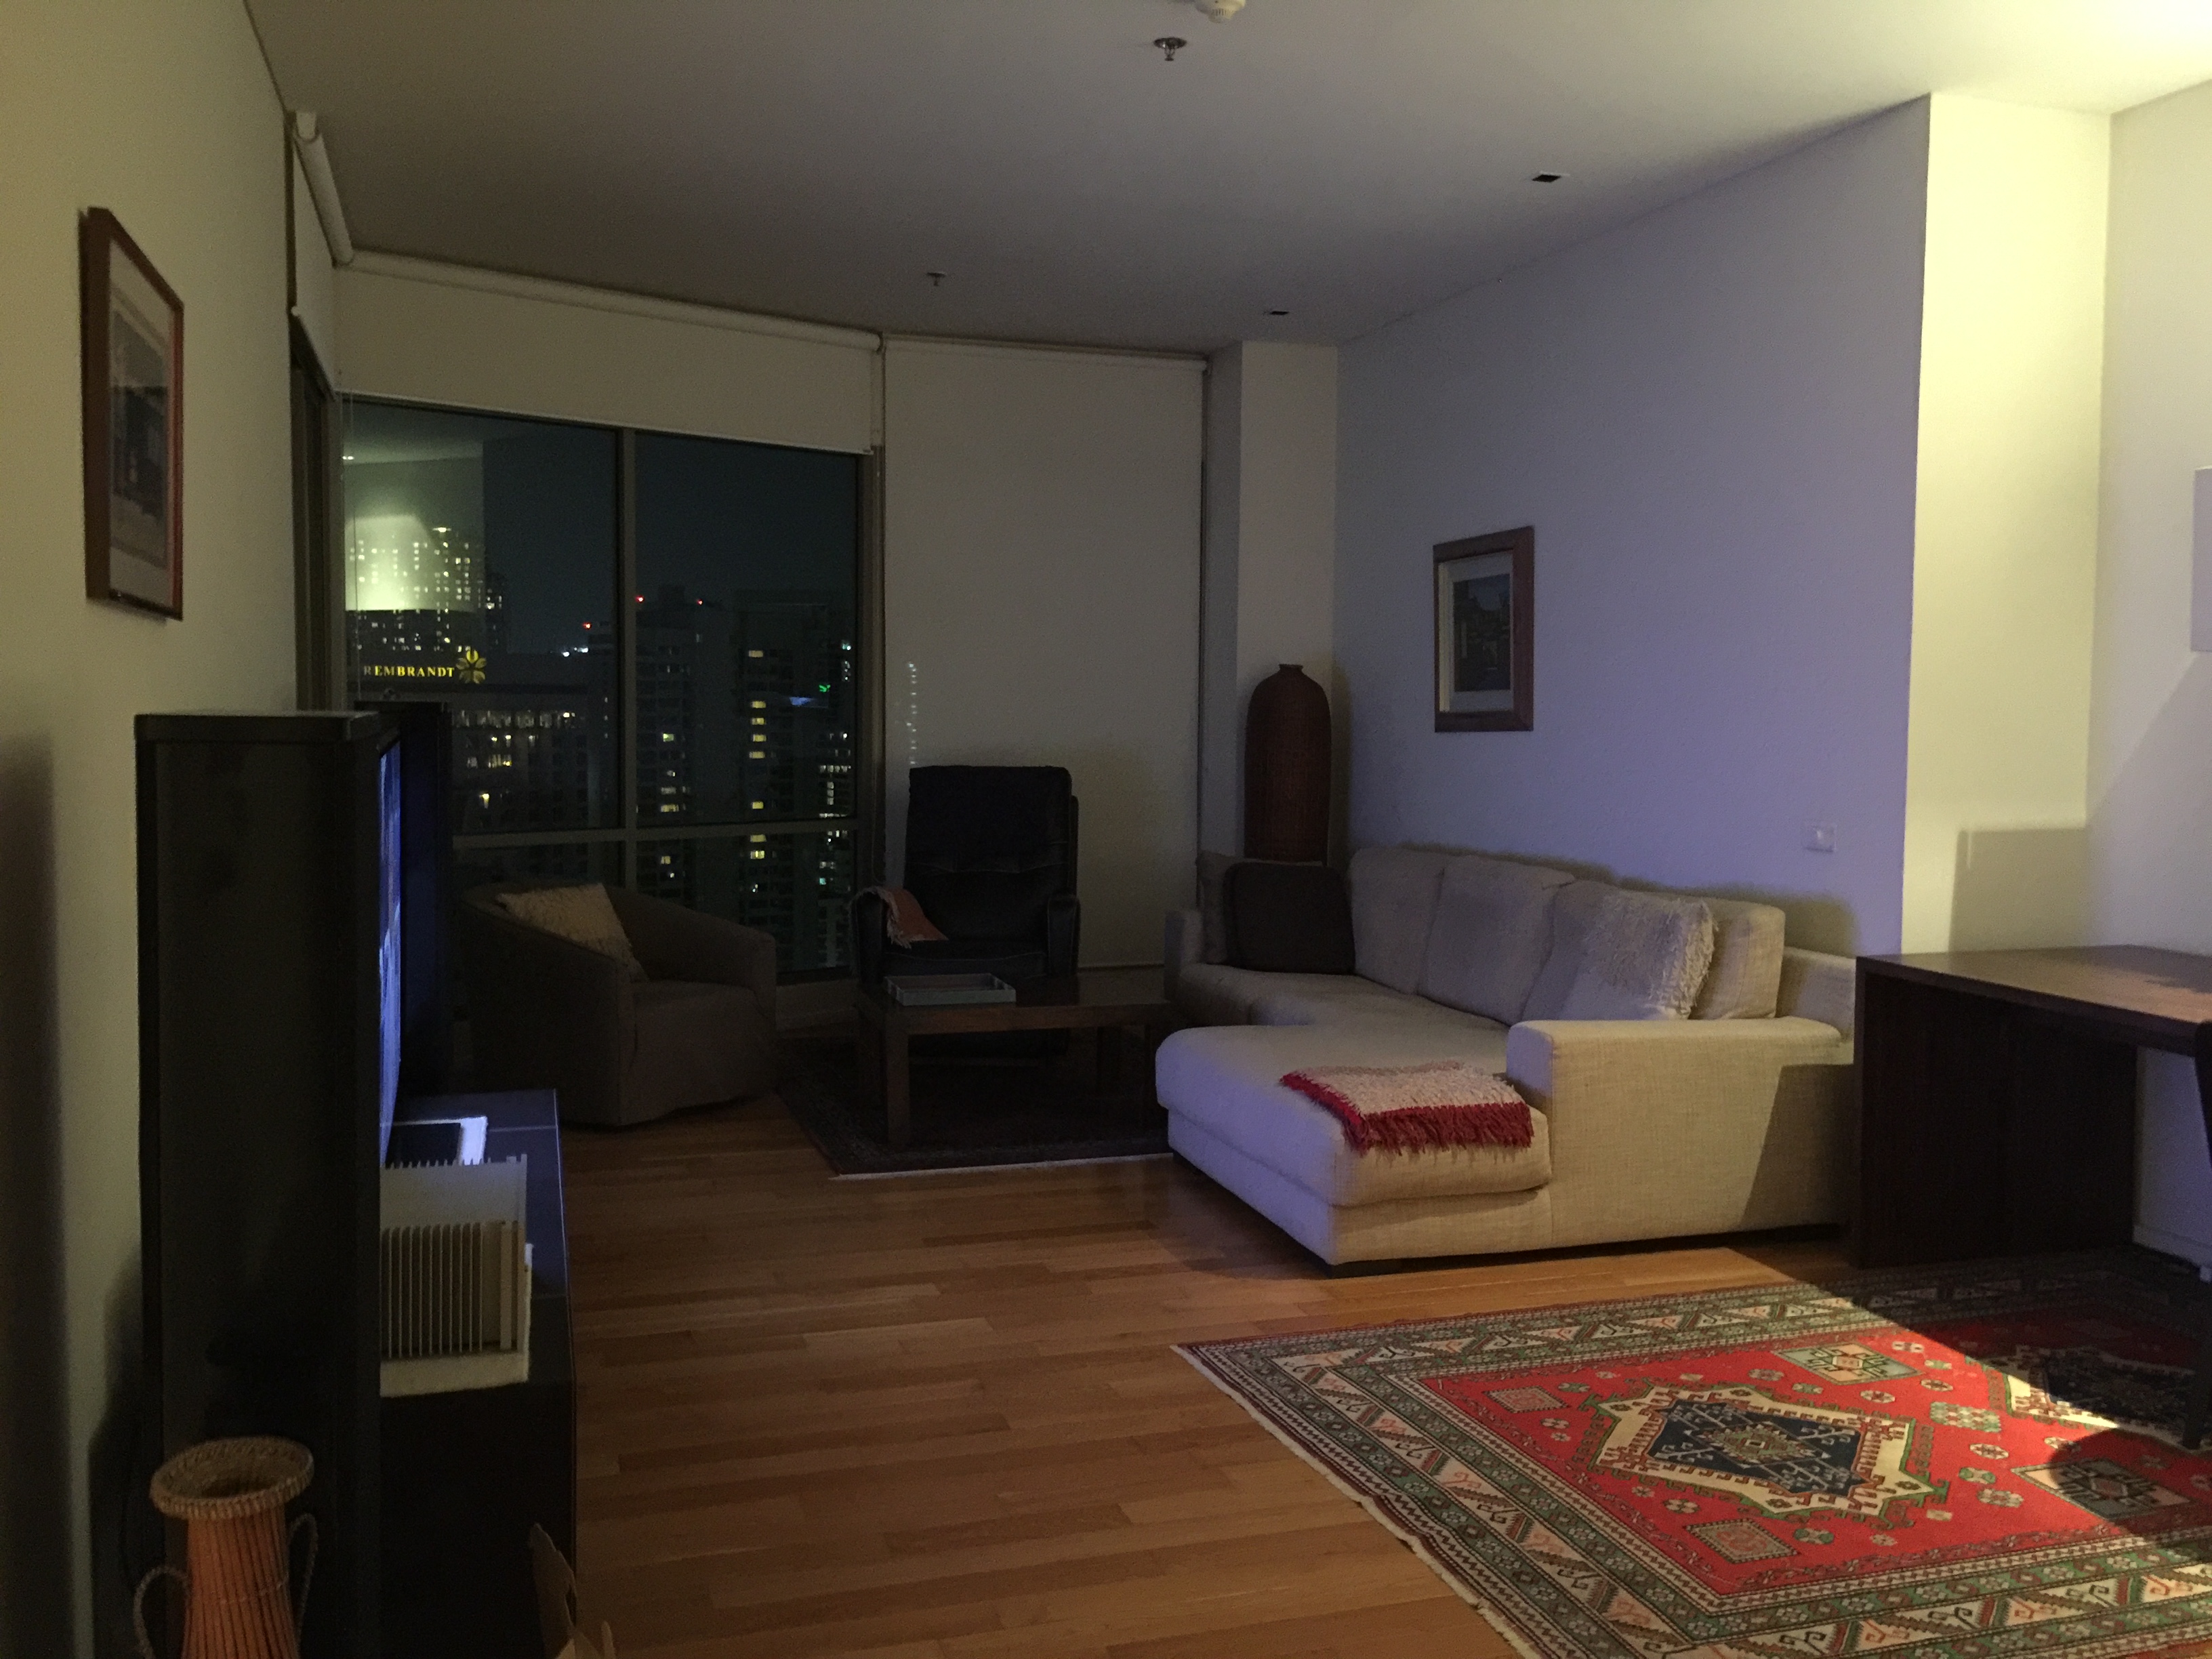 Sukhumvit 16 Condo for sale, Only a few minute walk to BTS Asoke, 1 bedroom 67 sq.m.with nice view and high floor.